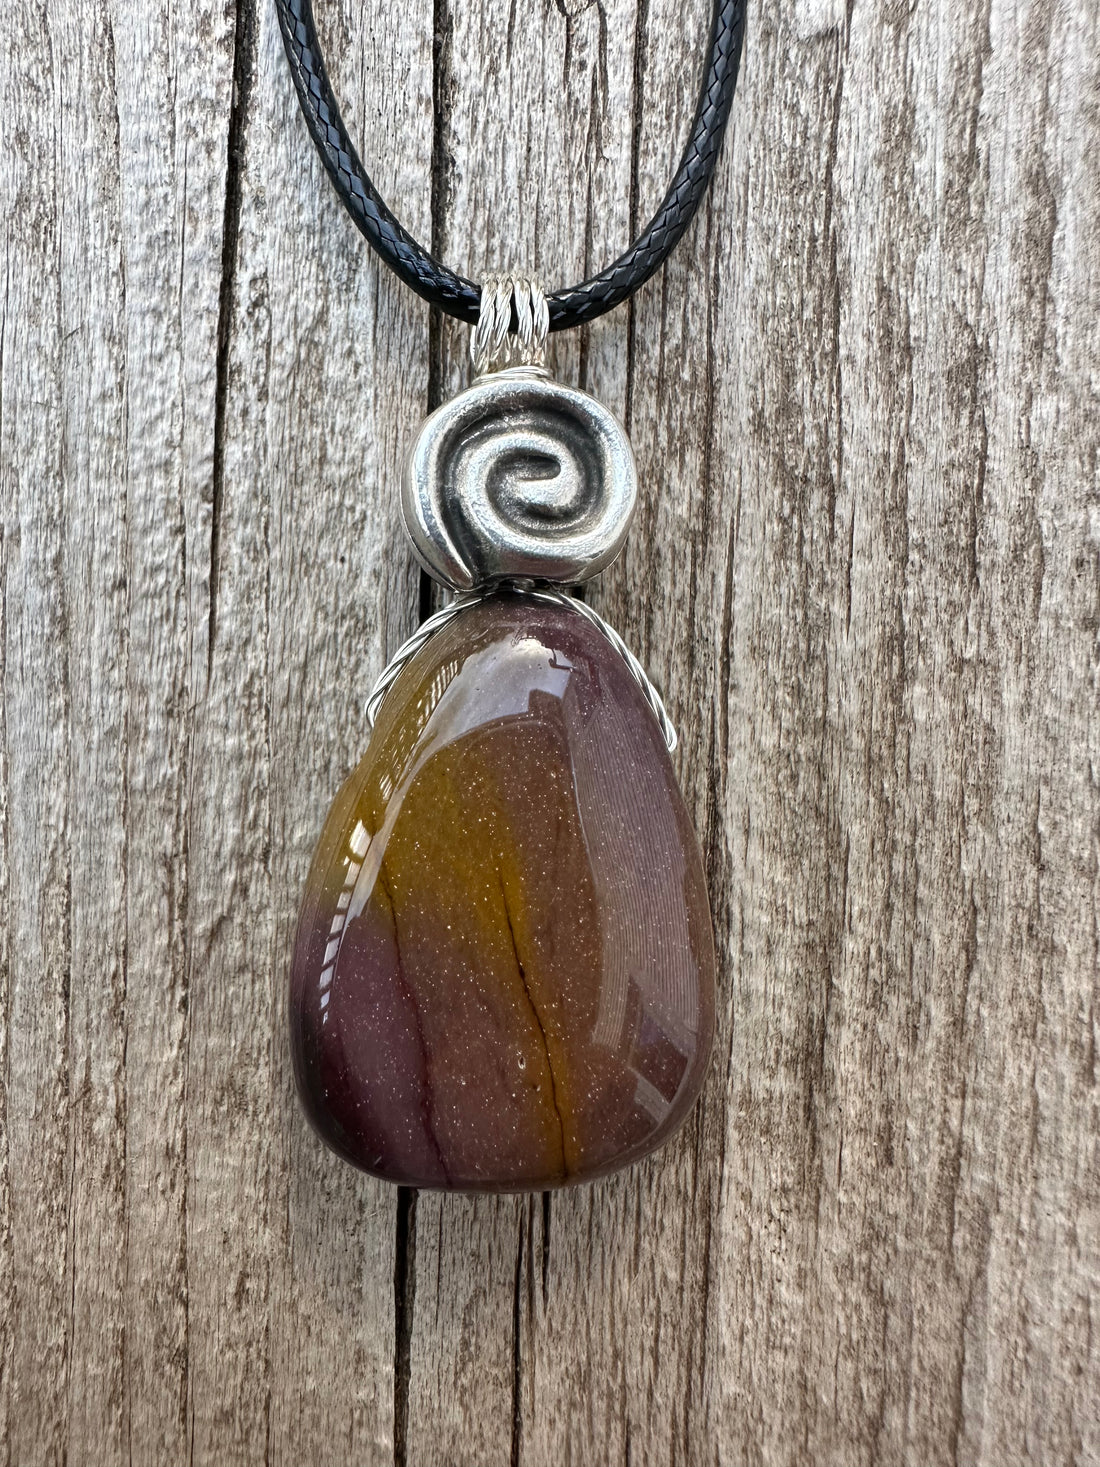 Mookaite Jasper for Options, Balance and New Experiences. Pewter Accent.